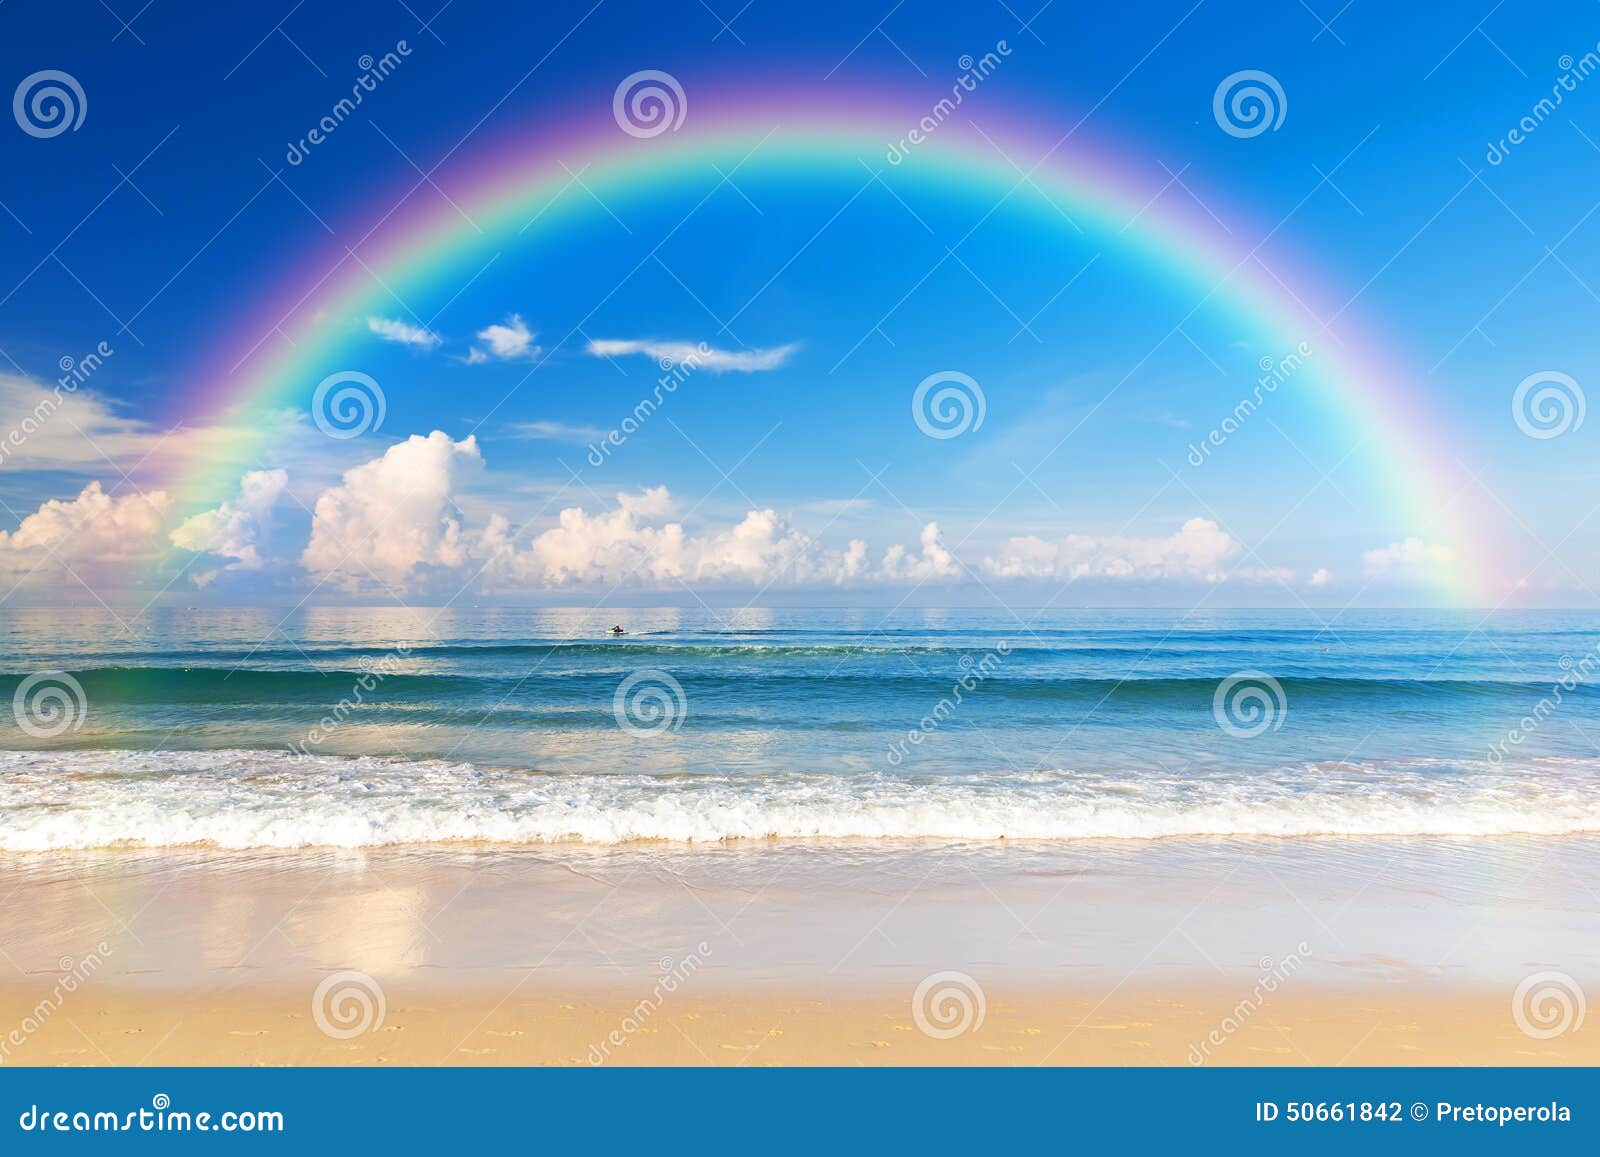 beautiful sea with a rainbow in the sky